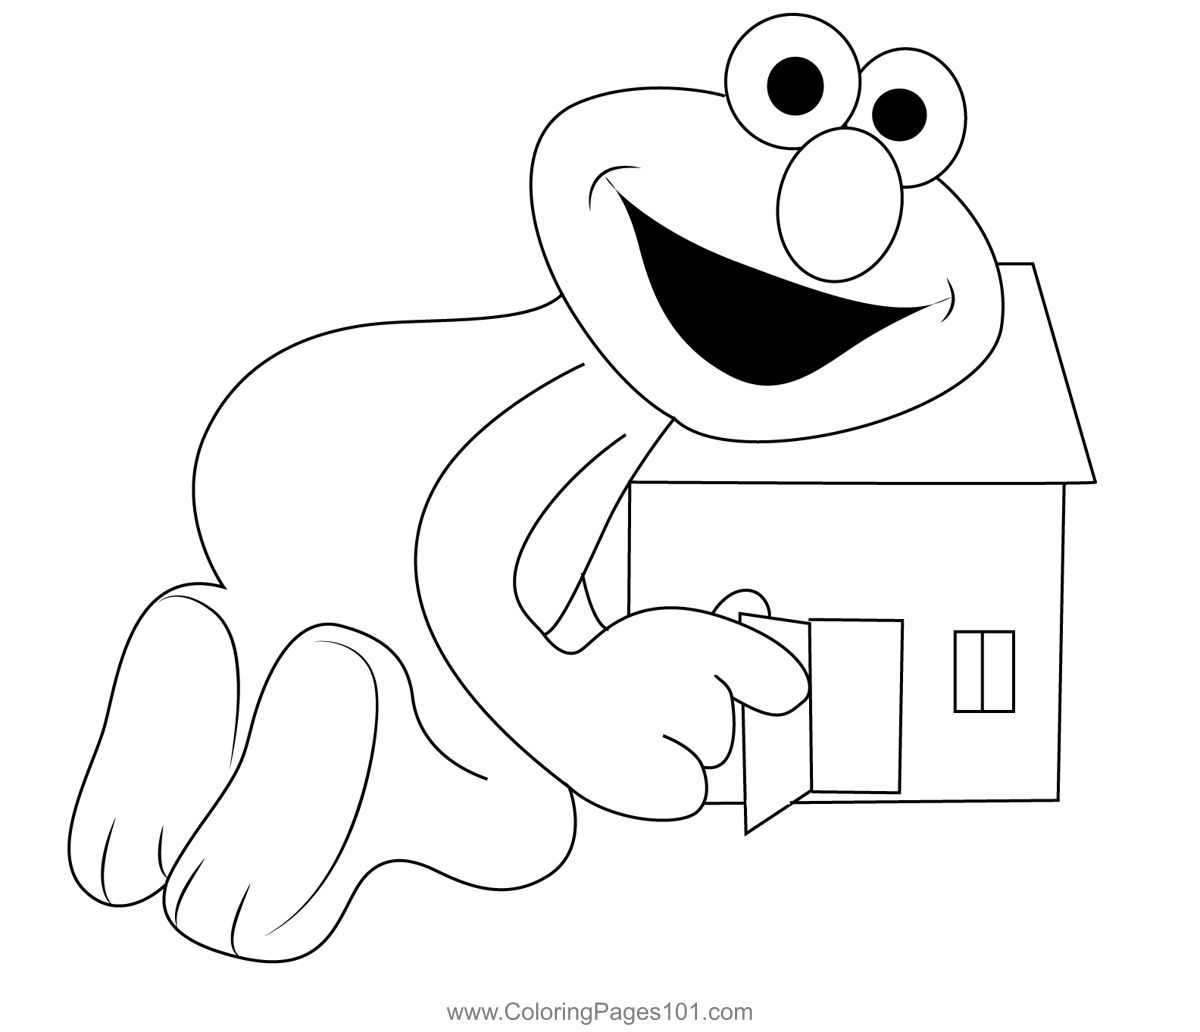 elmo-playing-coloring-page-for-kids-free-elmo-printable-coloring